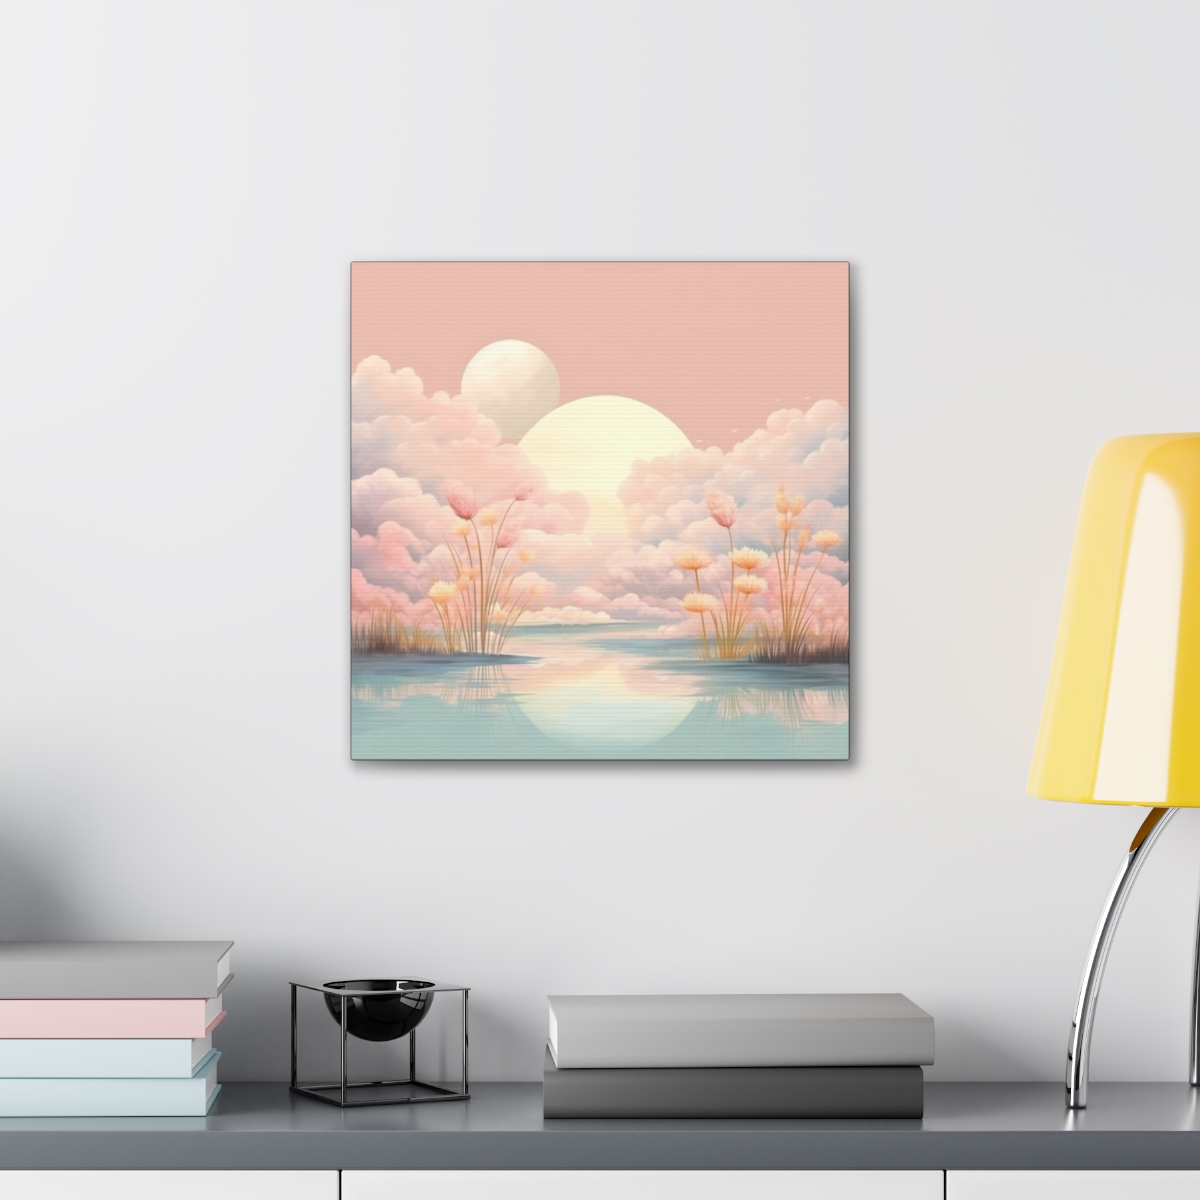 Ethereal Art Canvas Print: Clouds Falling On A Serene Lake